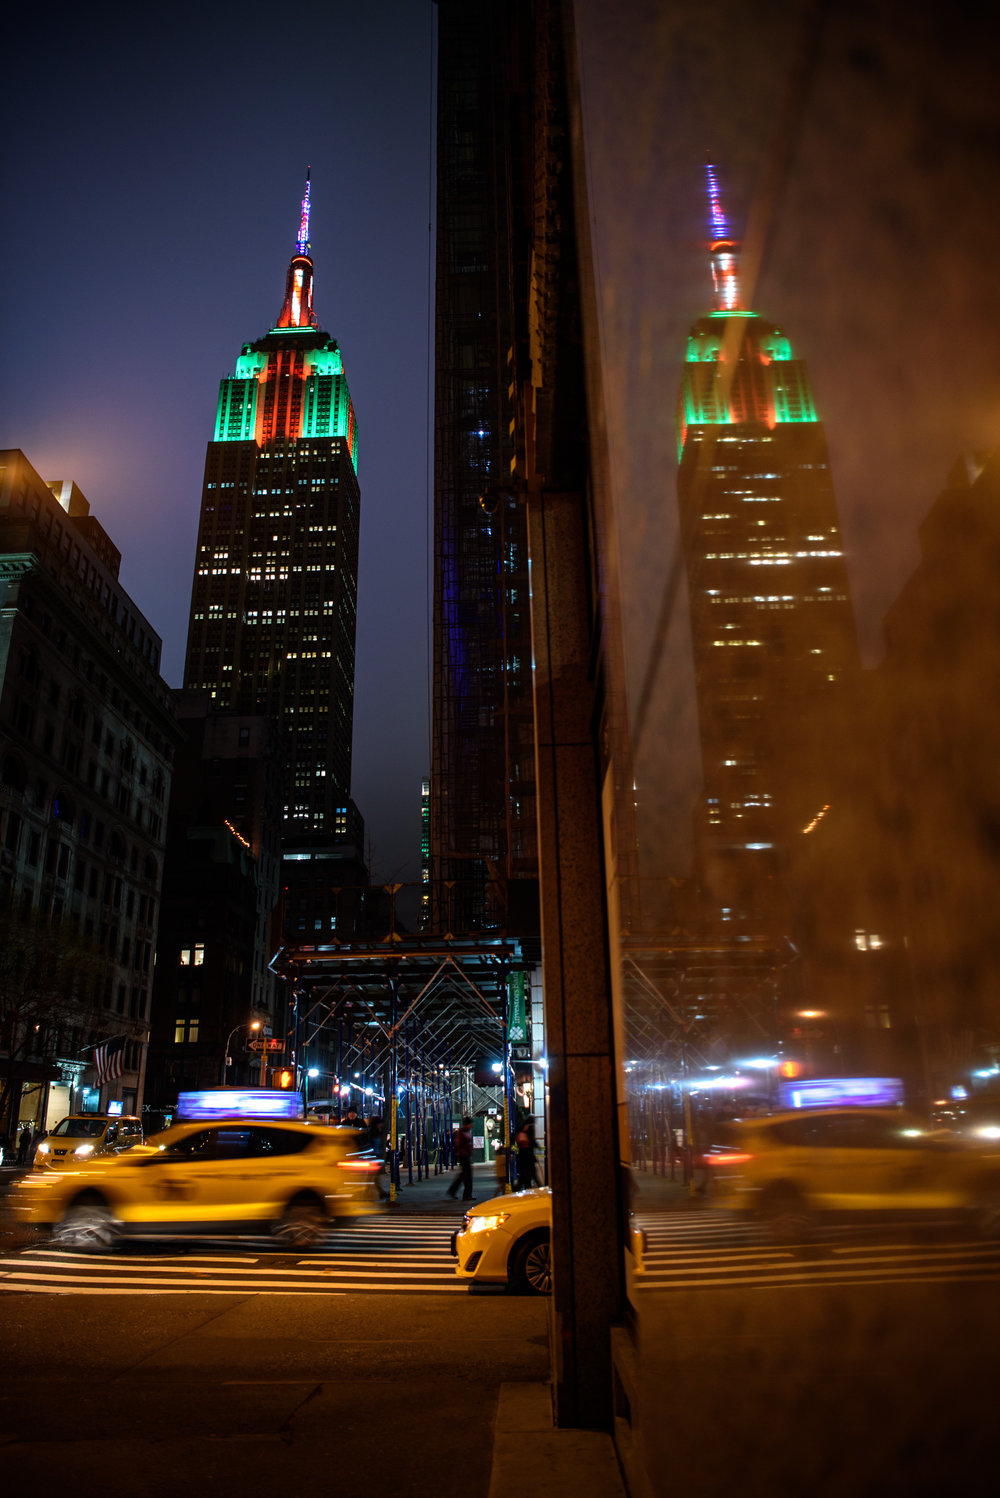 10. Empire State Building